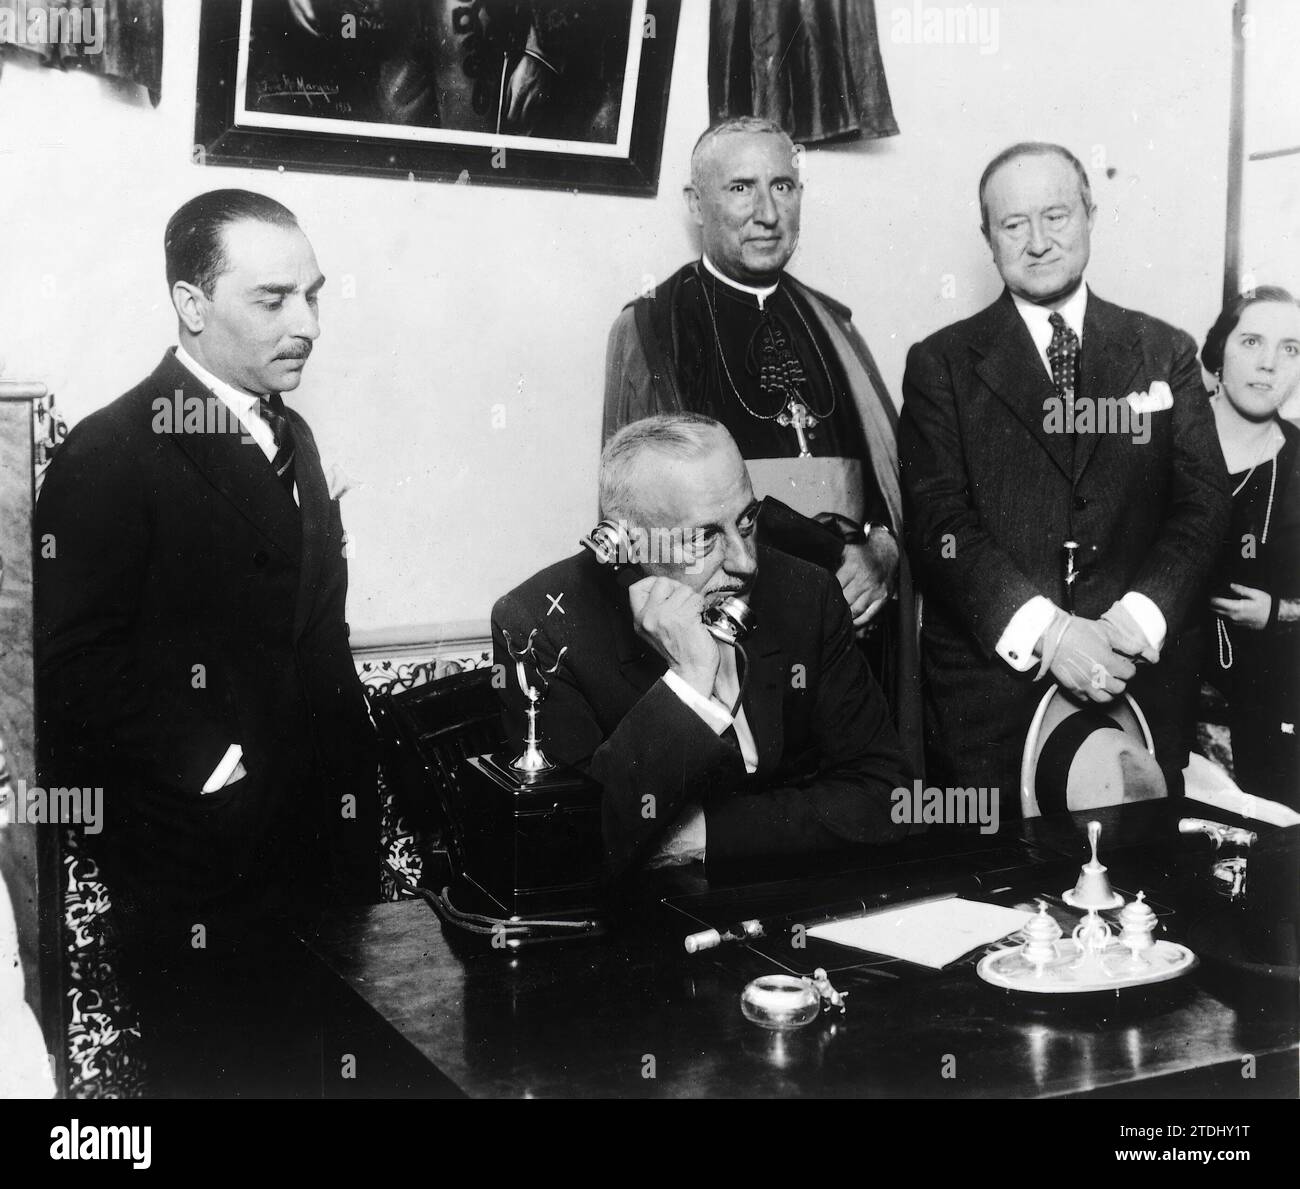 Almendralejo (Badajoz), 10/07/1926. The Marquis of Estella in Almendralejo. General Primo de Rivera (x) hearing the greeting of the mayors of the towns belonging to the new Seville-Villafranca-Almendralejo telephone line, in the act of inaugurating this last center. Behind, the bishop of the diocese, the governor of Badajoz and the director of the fifth district, Mr. Gil Merino. Credit: Album / Archivo ABC Stock Photo